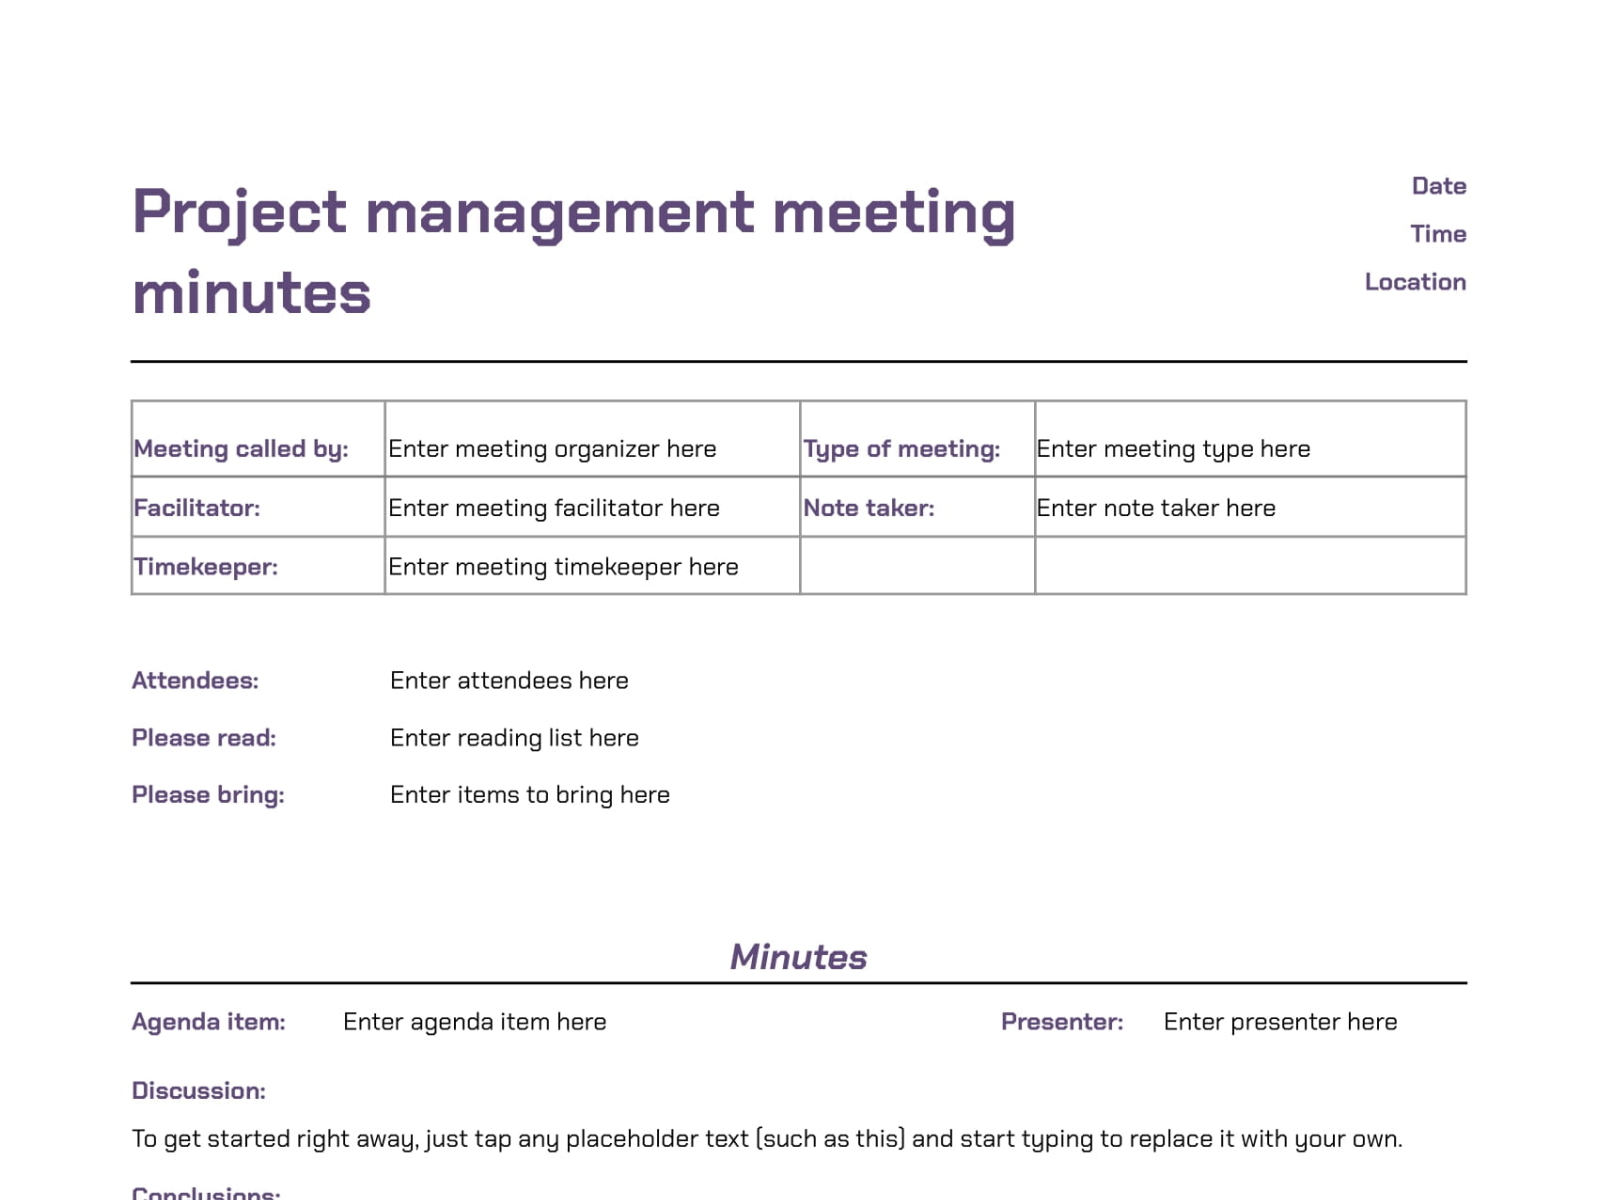 Project Management Meeting Minutes Templates by FREE Google Docs